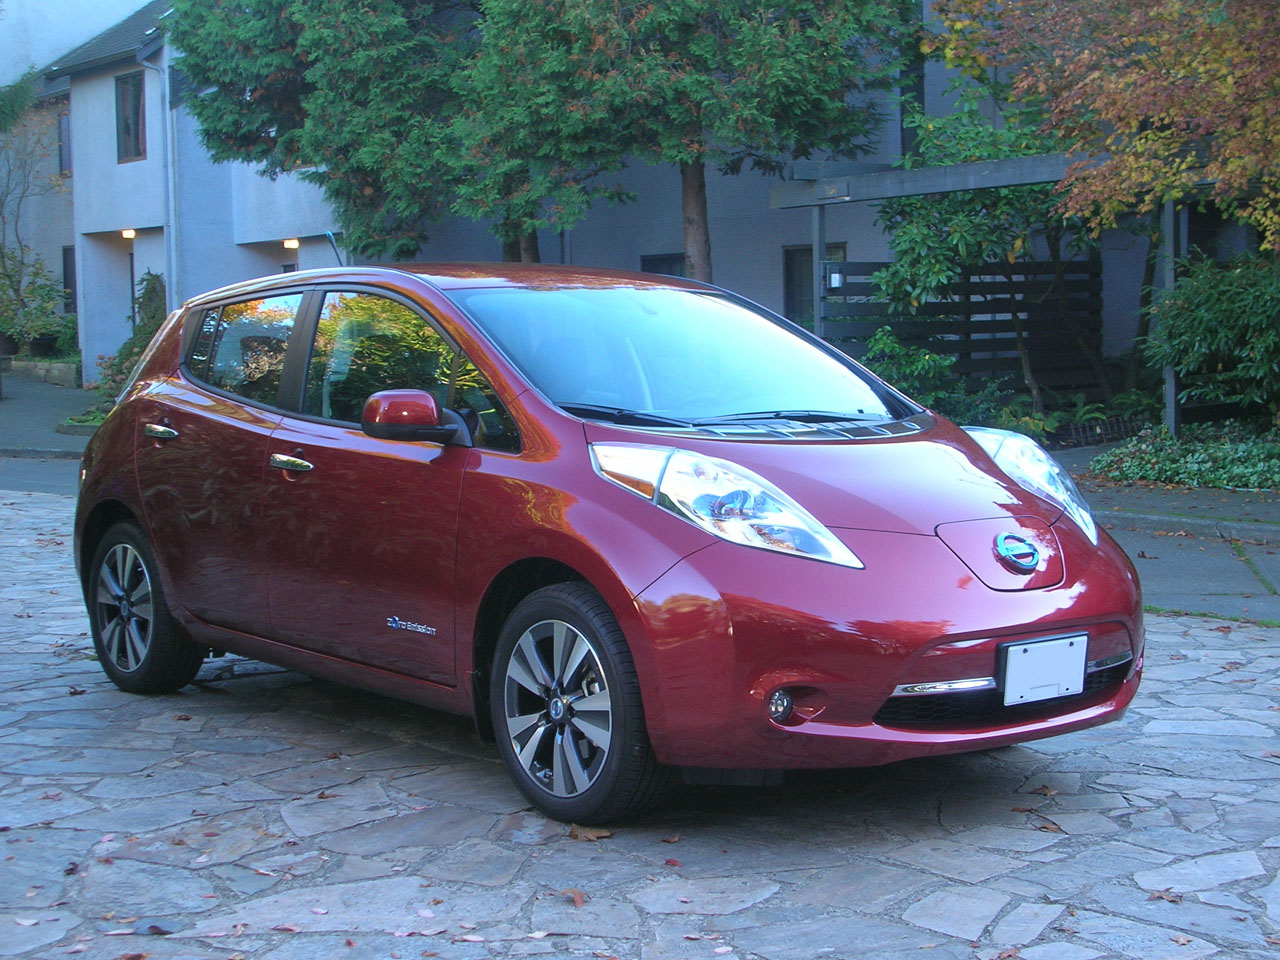 Nissan leaf prices in canada #7